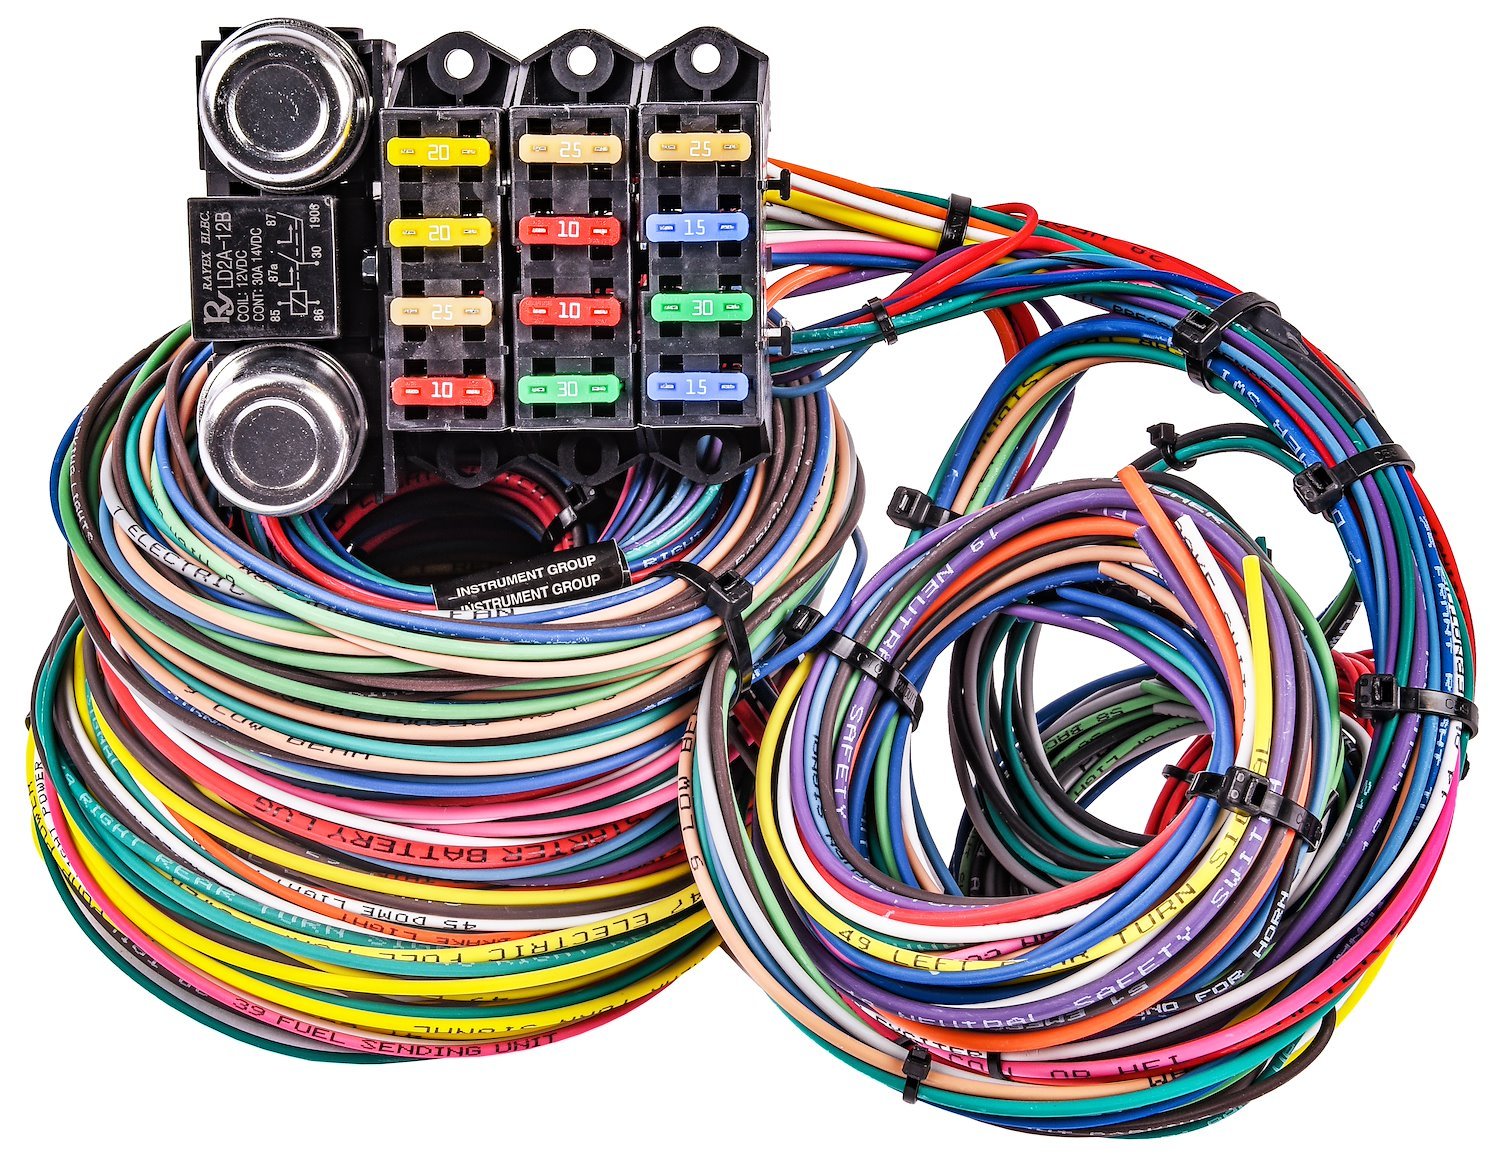 Self Centering Y-Connector Tow Harness with Pulley